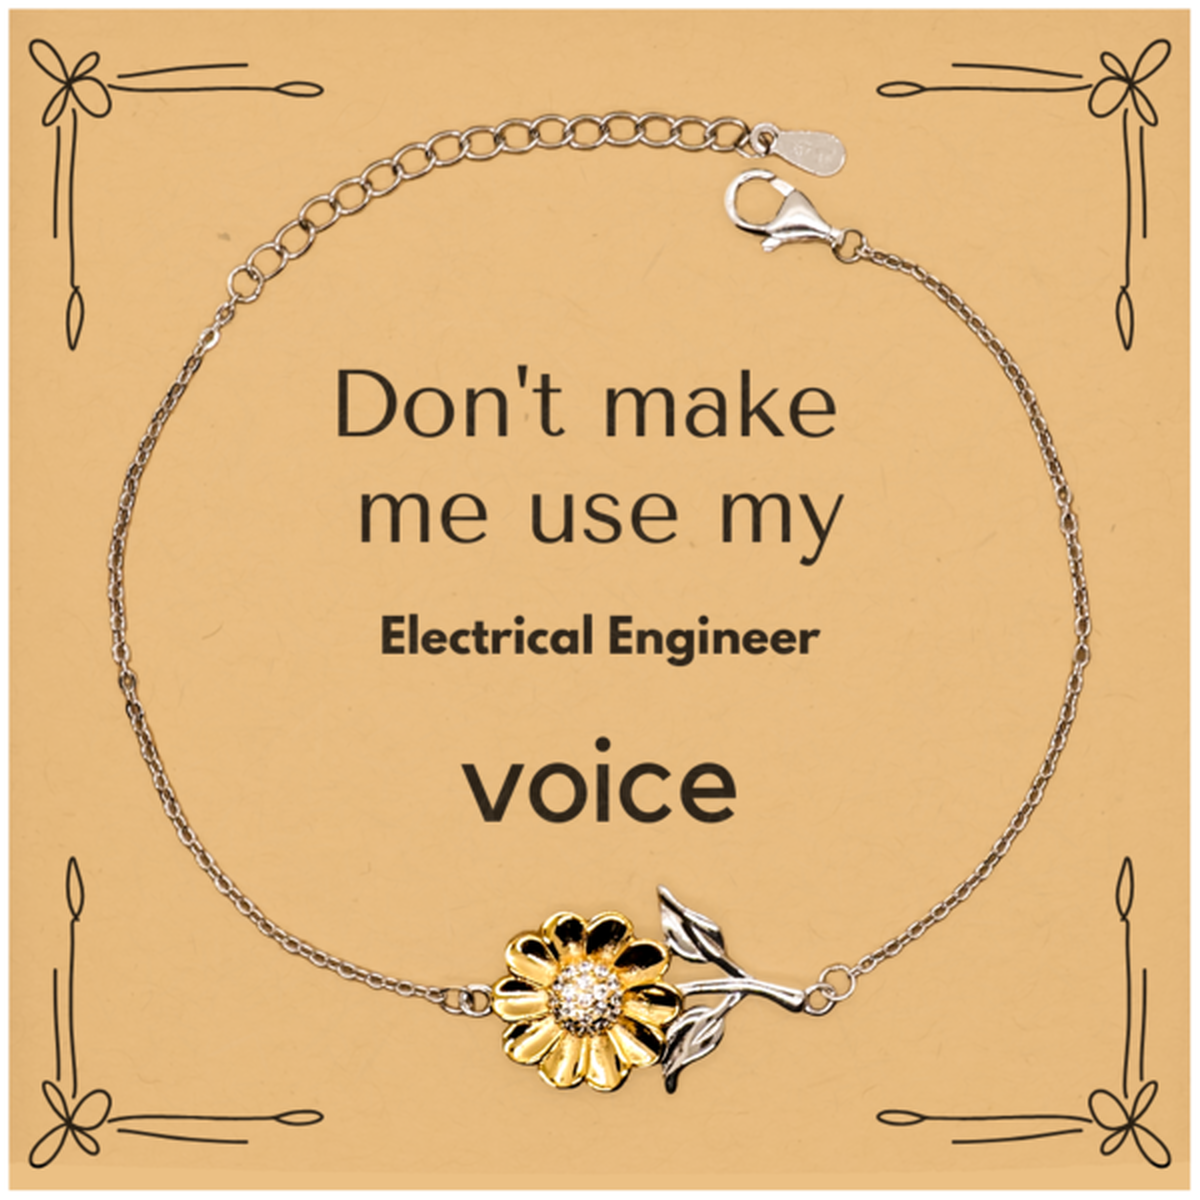 Don't make me use my Electrical Engineer voice, Sarcasm Electrical Engineer Card Gifts, Christmas Electrical Engineer Sunflower Bracelet Birthday Unique Gifts For Electrical Engineer Coworkers, Men, Women, Colleague, Friends